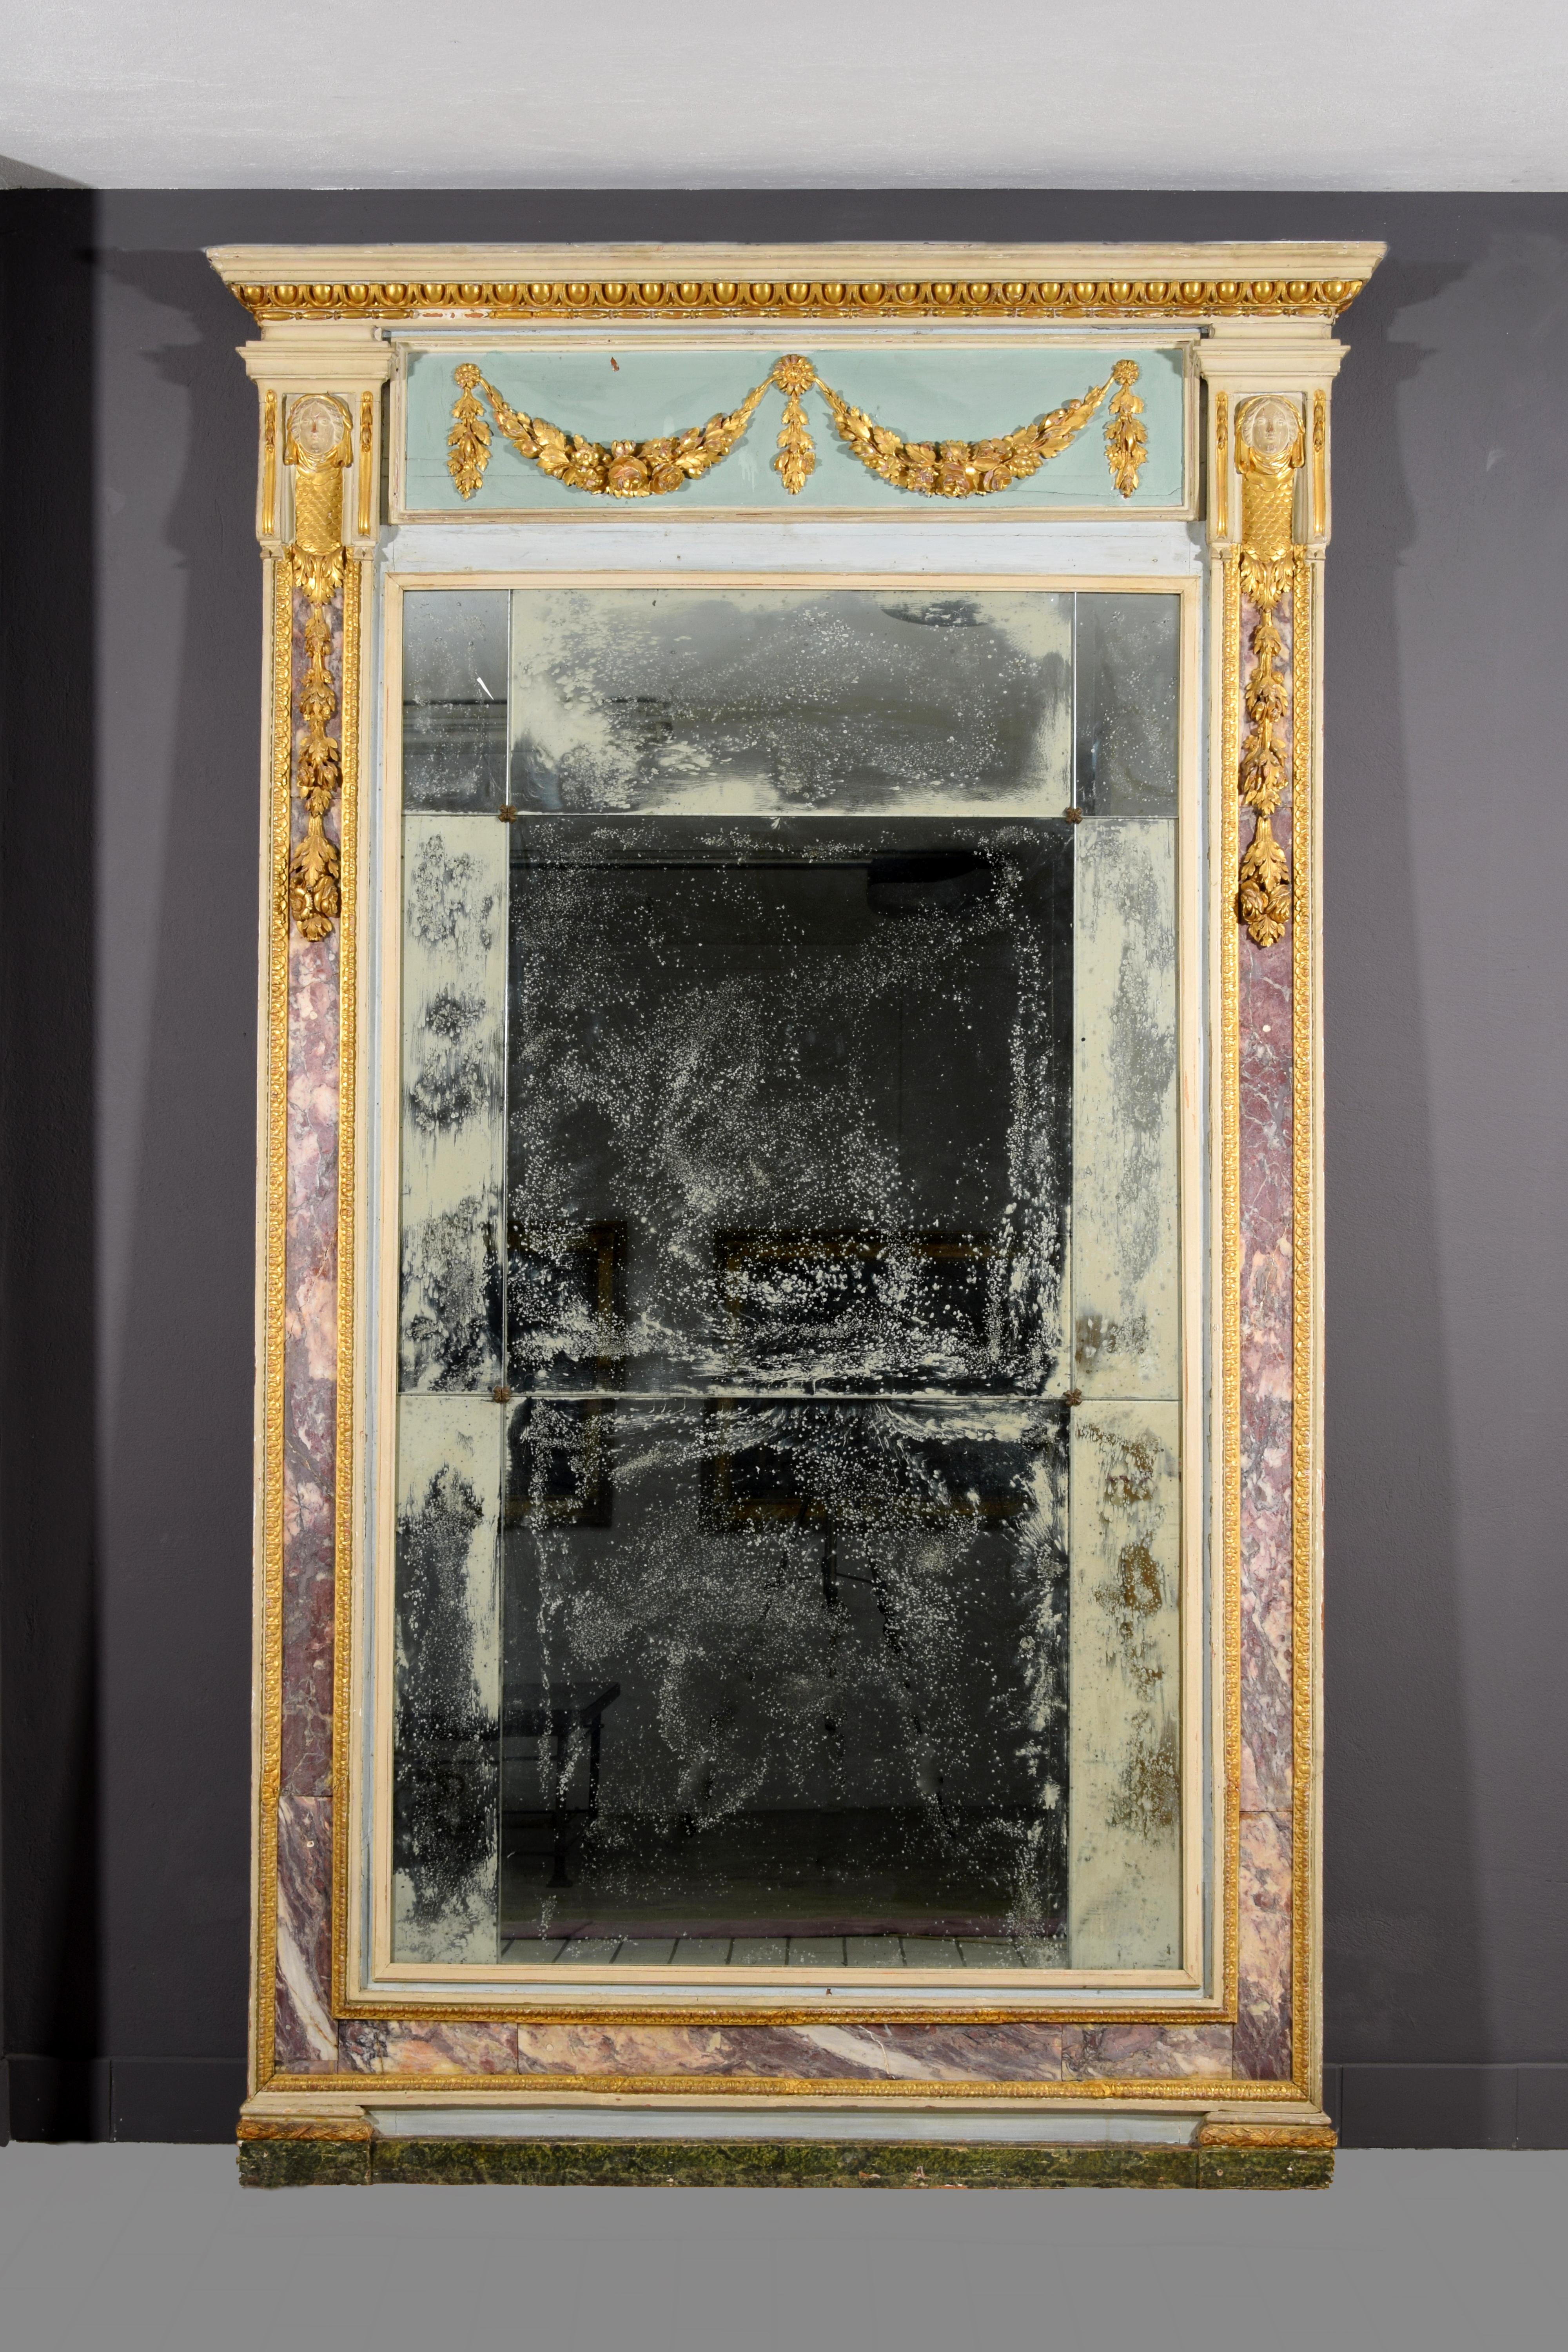 18th Century, Large Italian Neoclassical Lacquered Wood and Marble Mirror

This large mirror was built in the Genoese area (Italy) in the neoclassical period, in the second half of the 18th century.
The rectangular and linear frame is in carved,